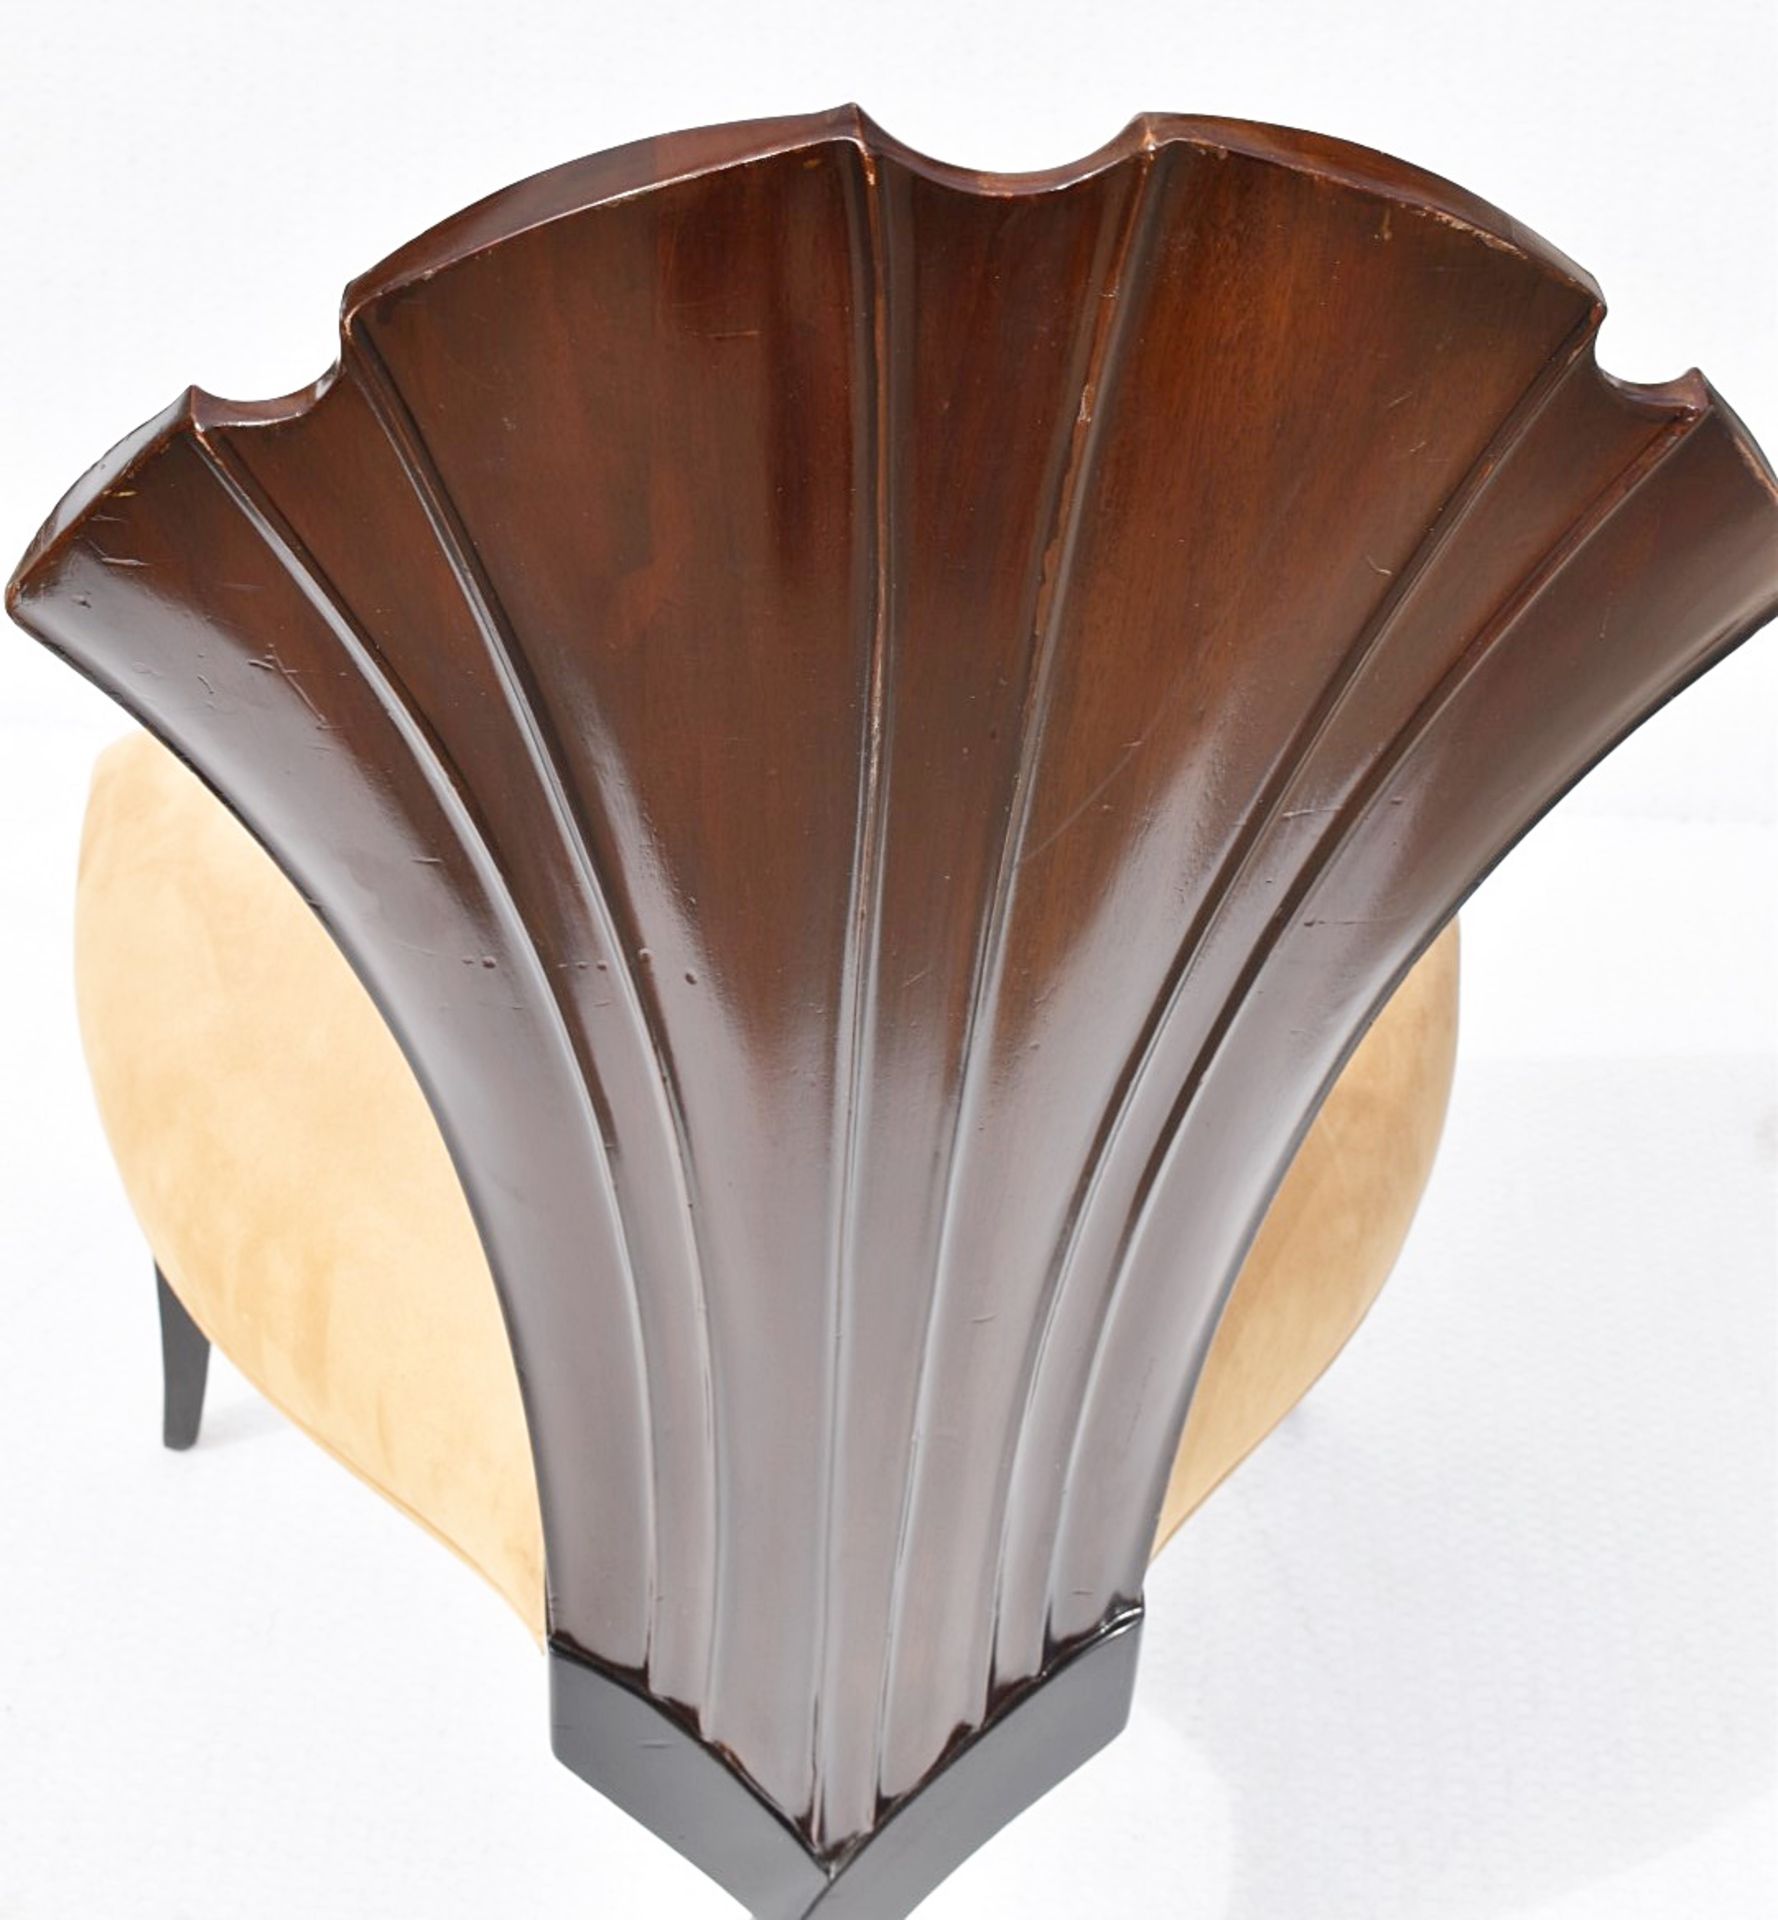 4 x CHRISTOPHER GUY 'La Croisette' Luxury Hand-carved Solid Mahogany Designer Dining Chairs - - Image 4 of 13